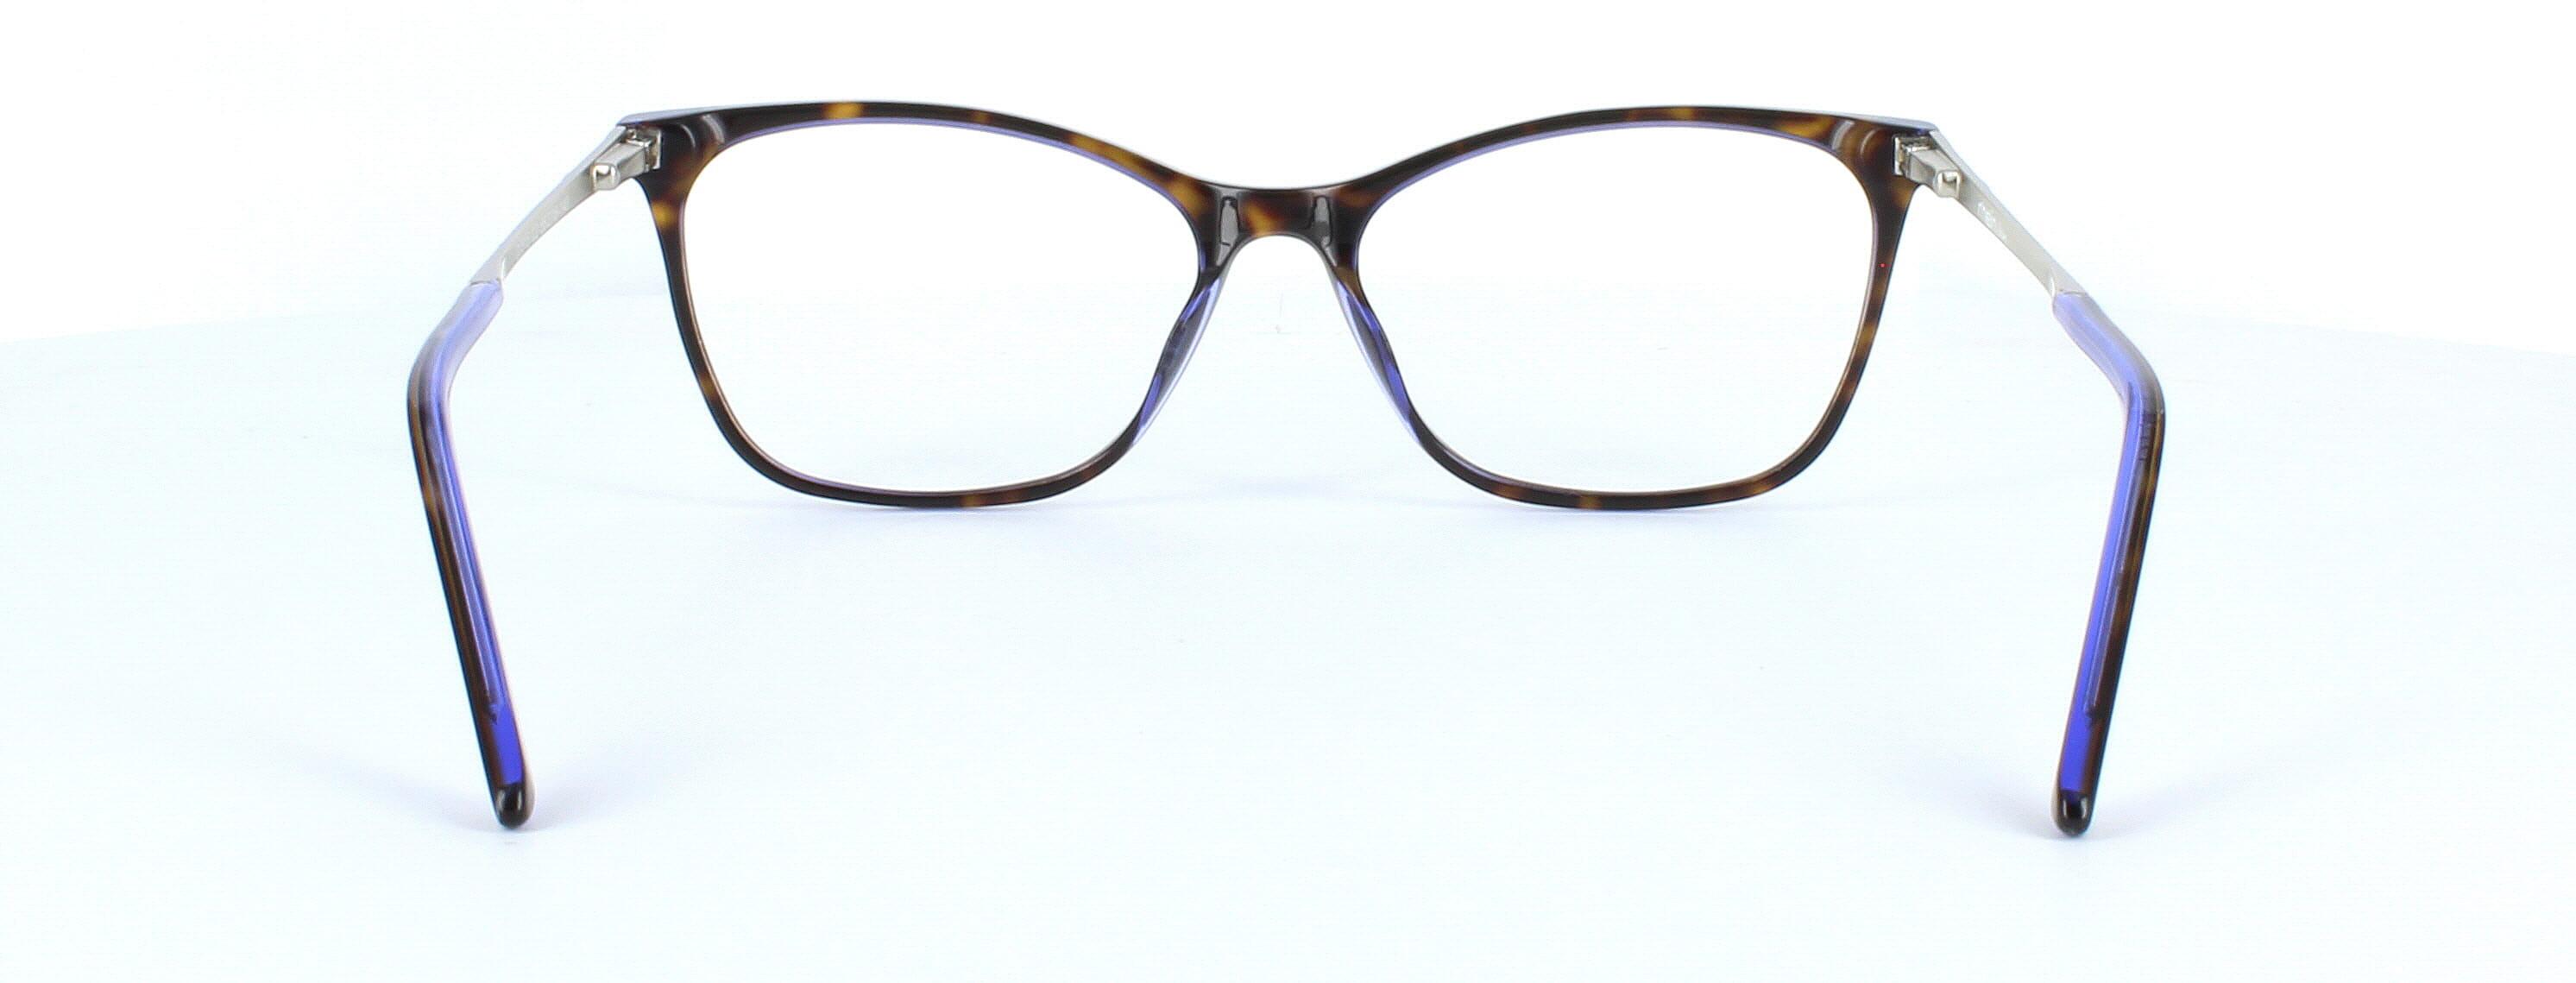 Bellina - ladies acetate glasses here in tortoise with crystal purple reverse - image view 5